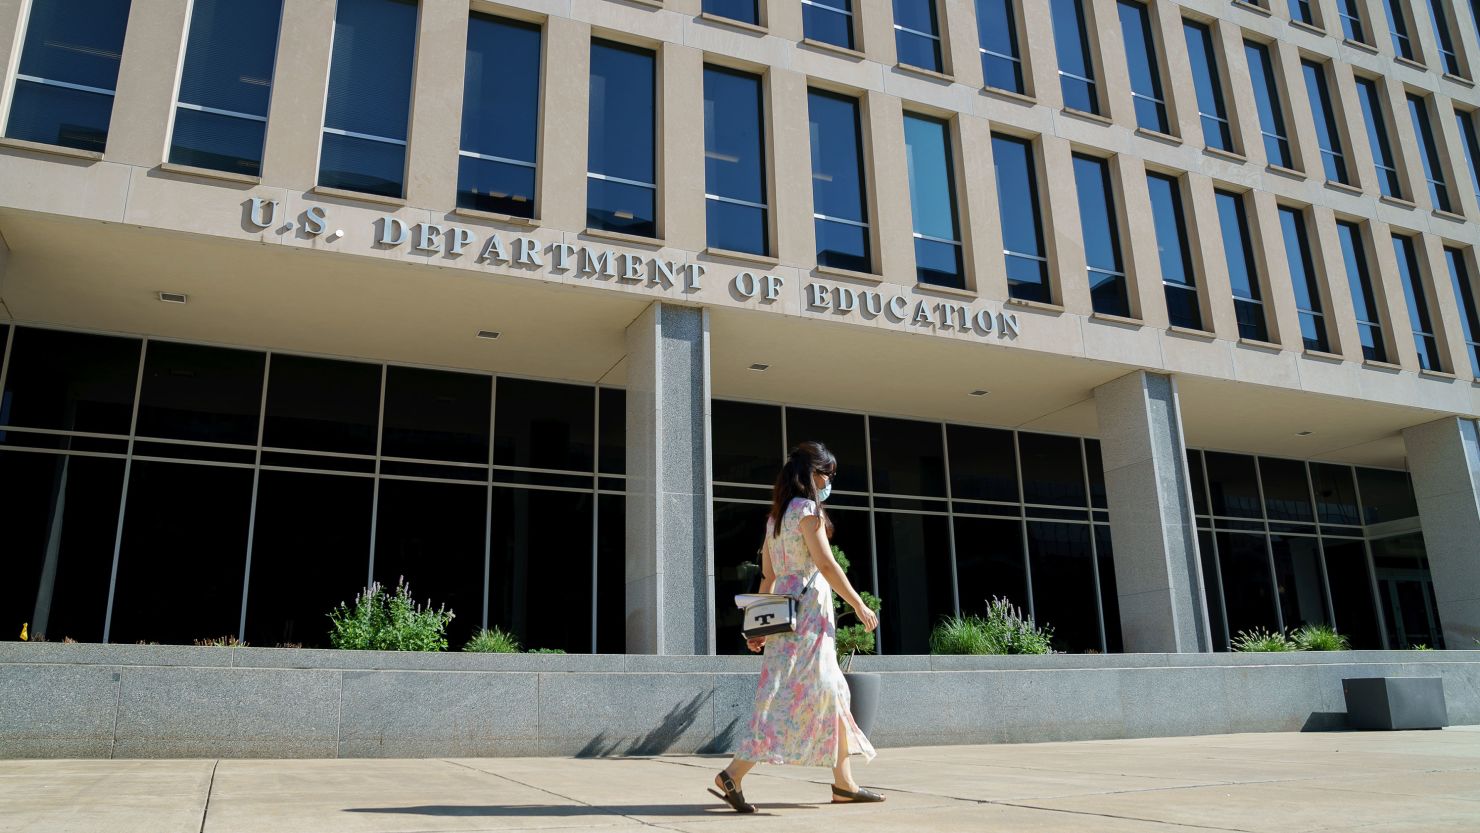 The Department of Education building in Washington, DC, is seen on August 17, 2020. 